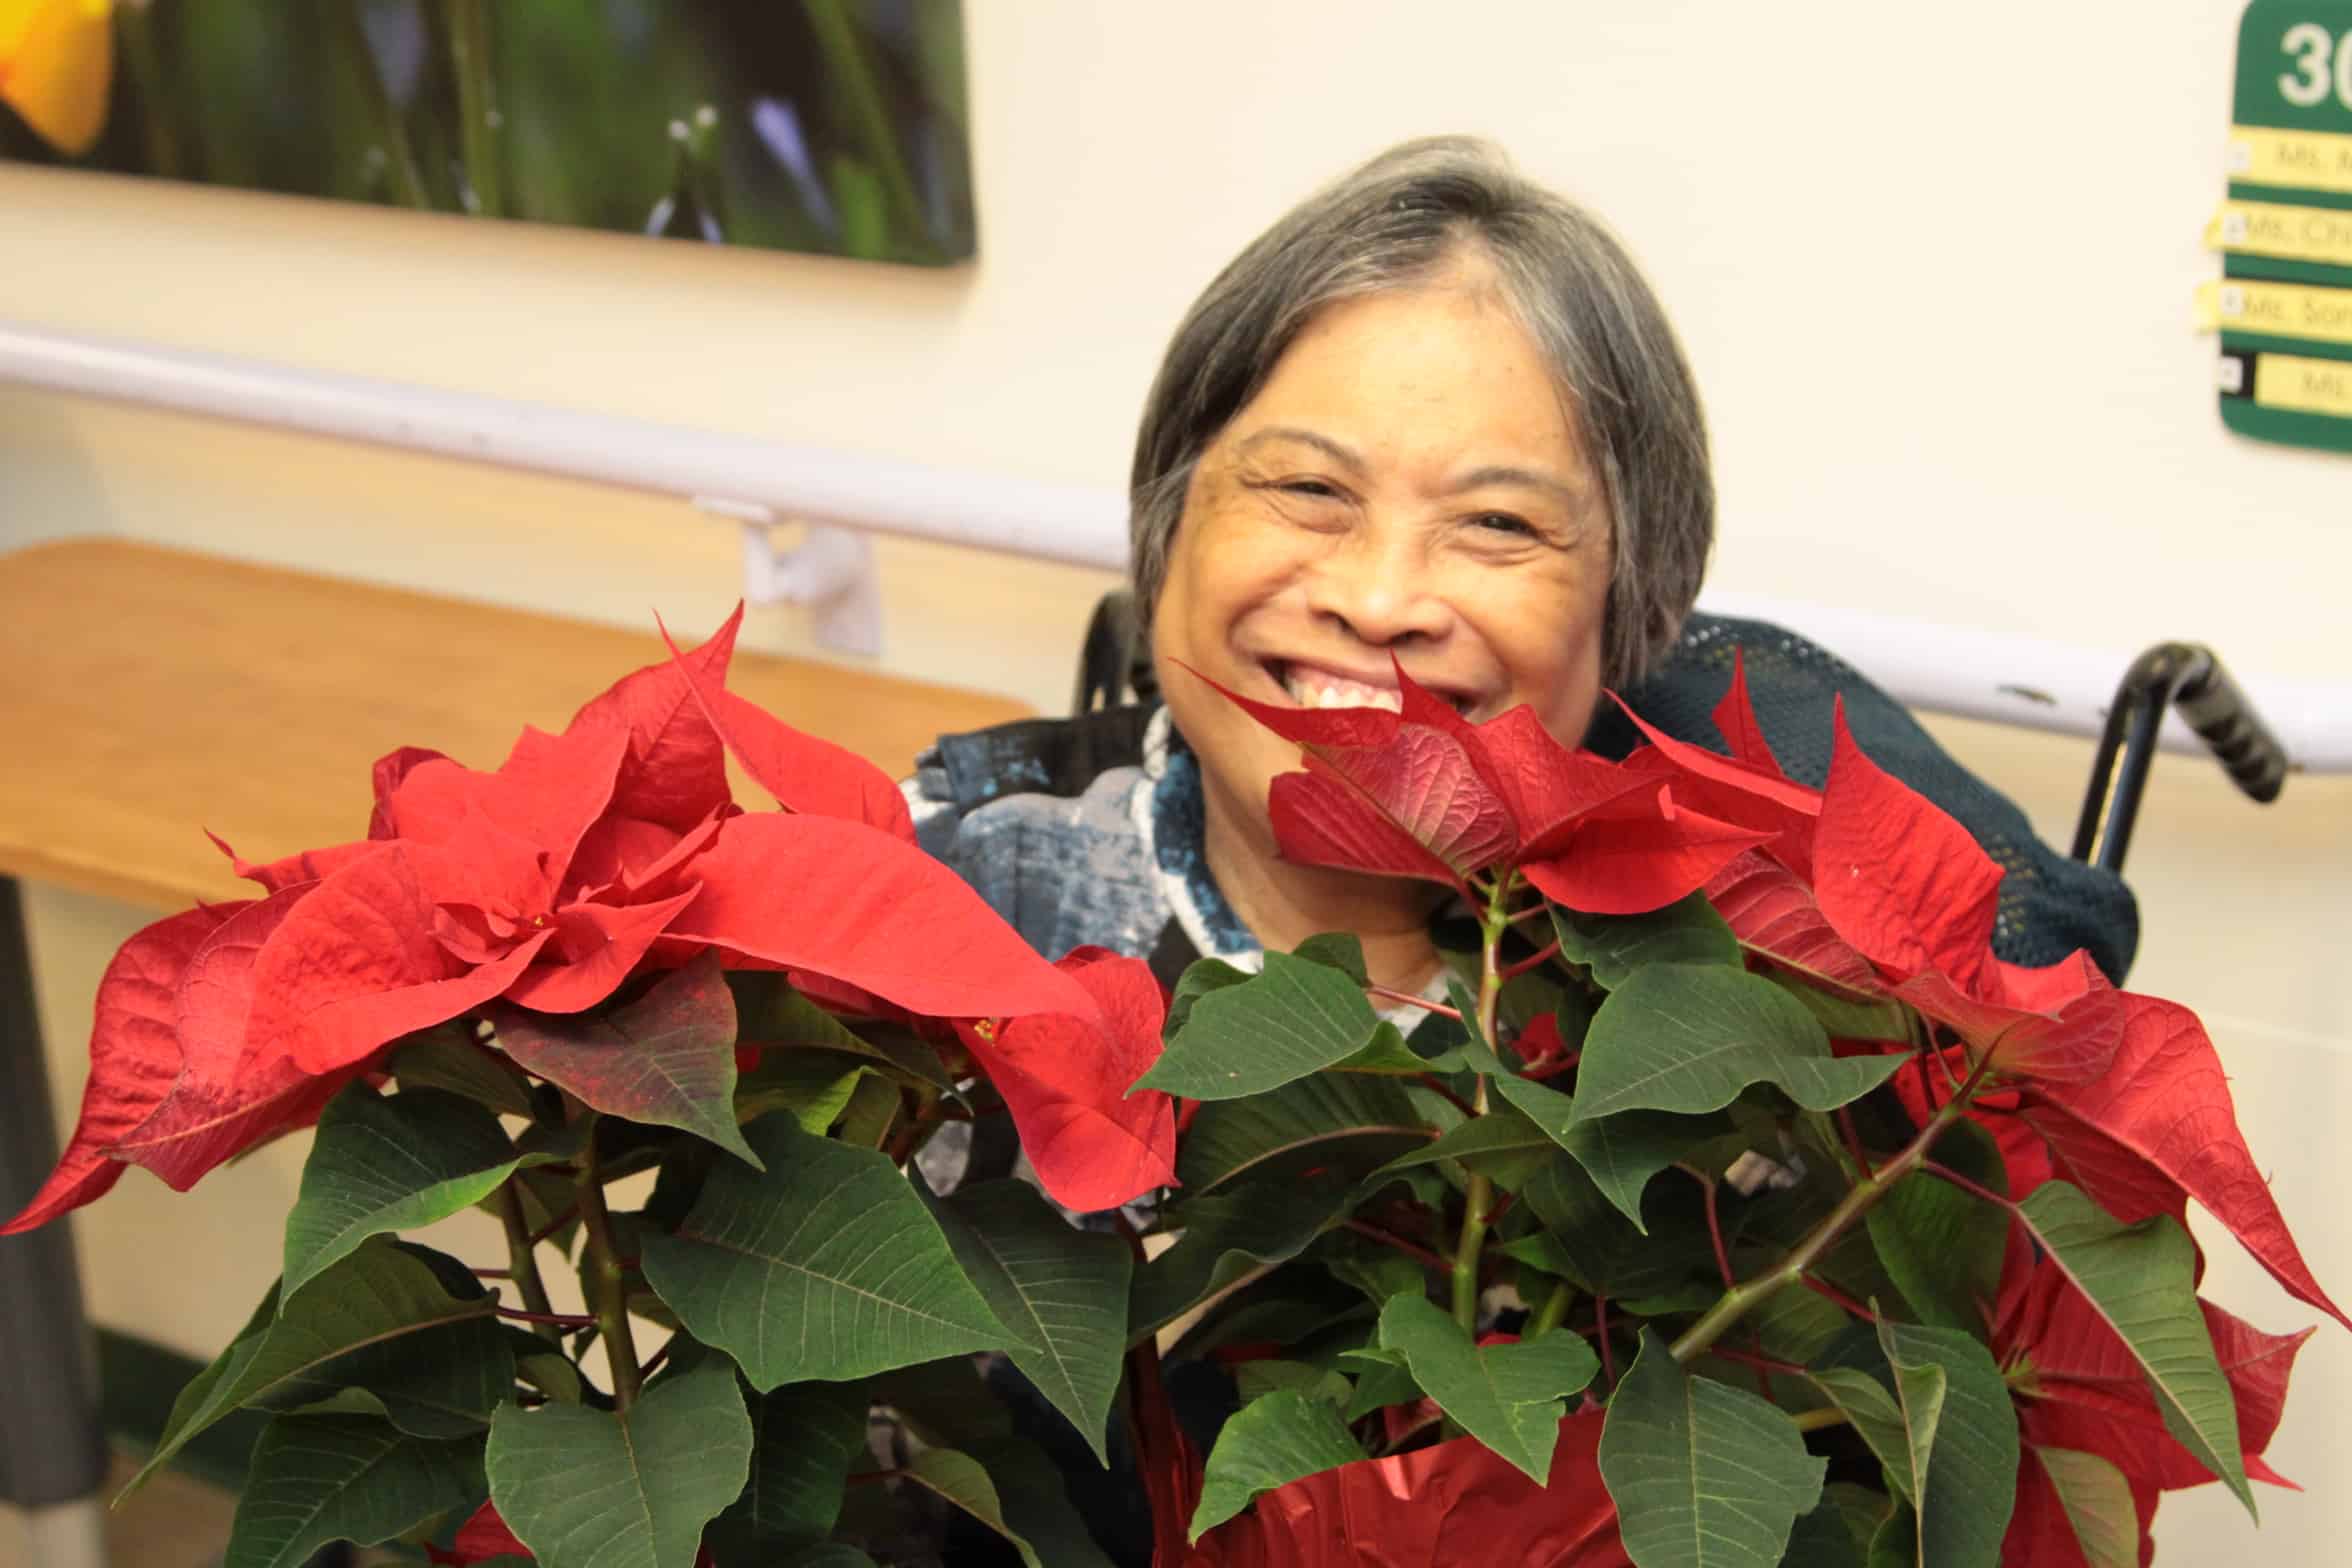 Sonia, a resident living in long-term care at Holy Family Hospital in Vancouver, was delighted to receive the gift of poinsettias from Meadowlands Horticultural.